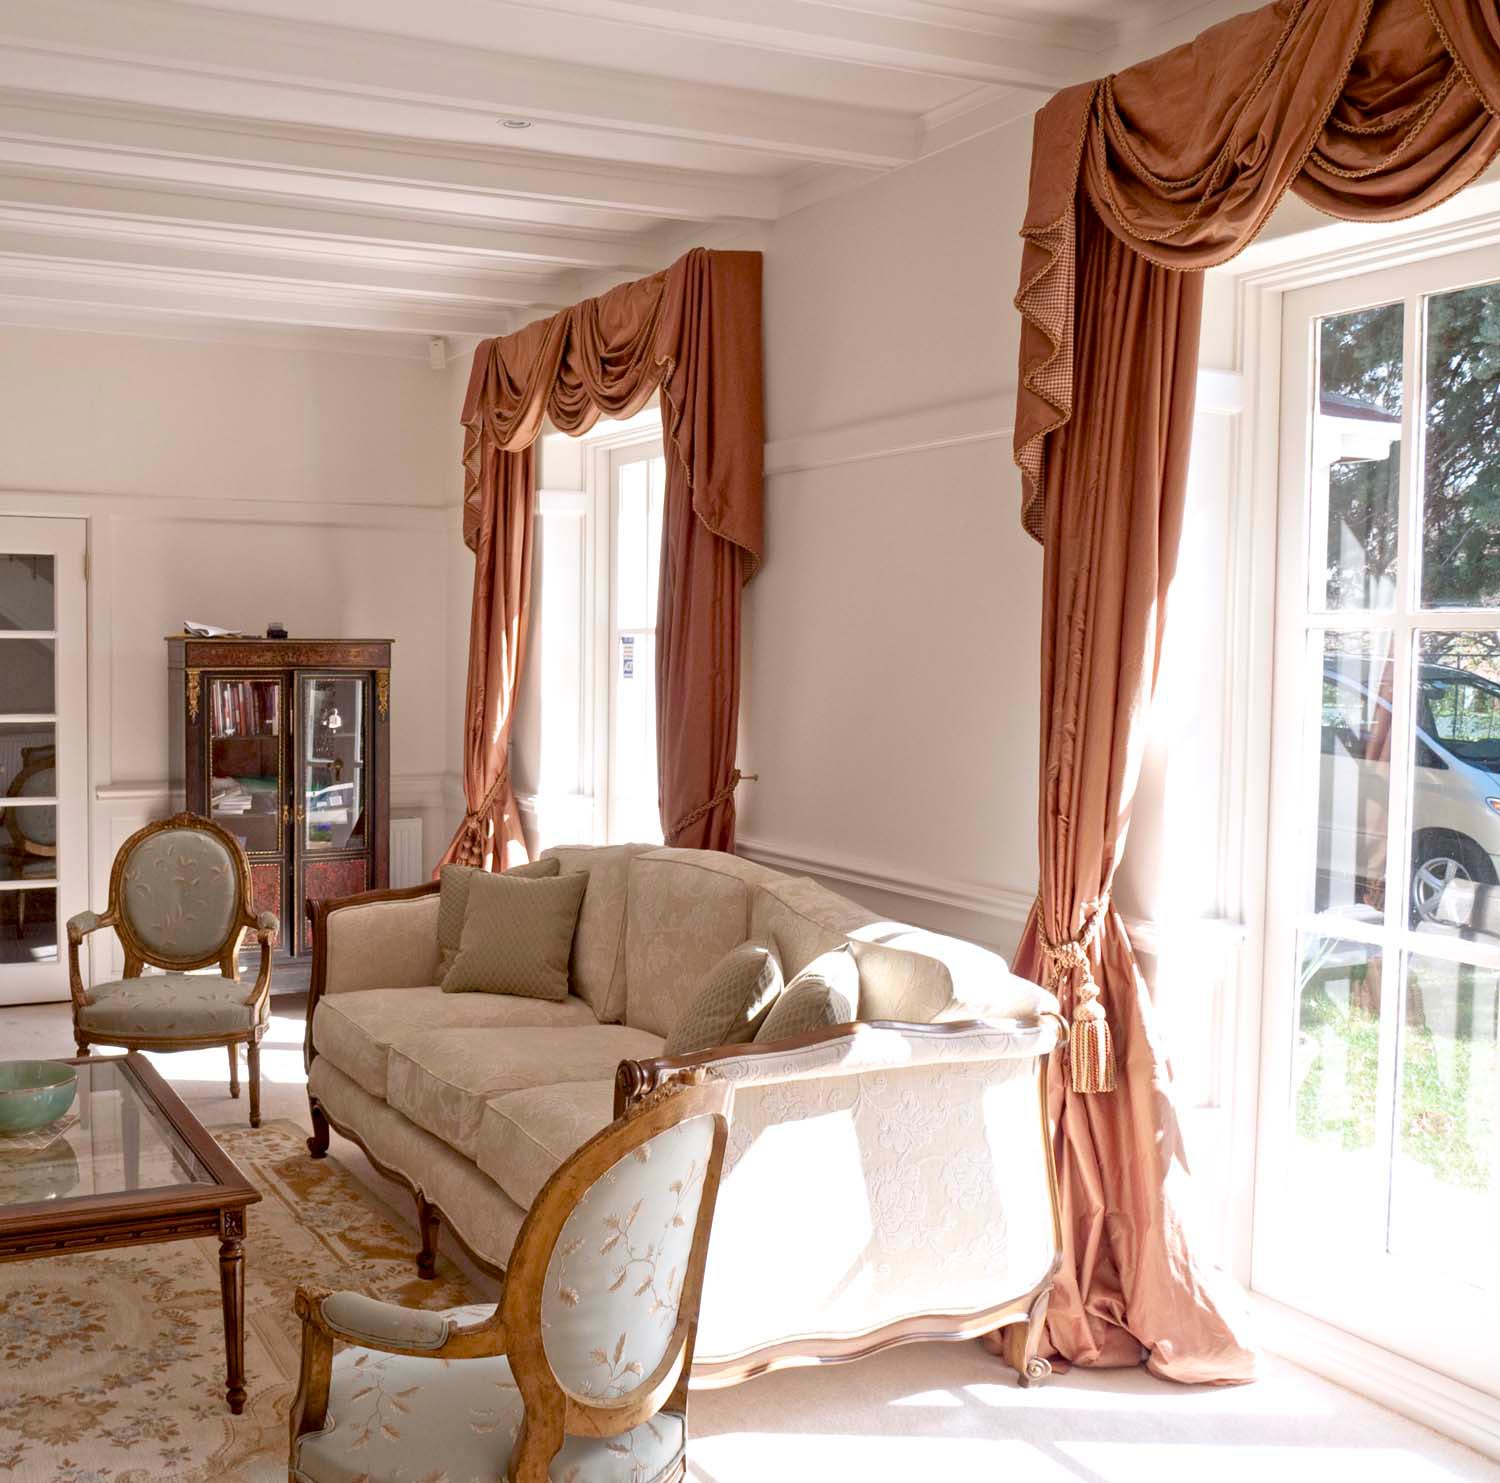 2 French stye interior with furniture, rugs, and curtains all designed in french style